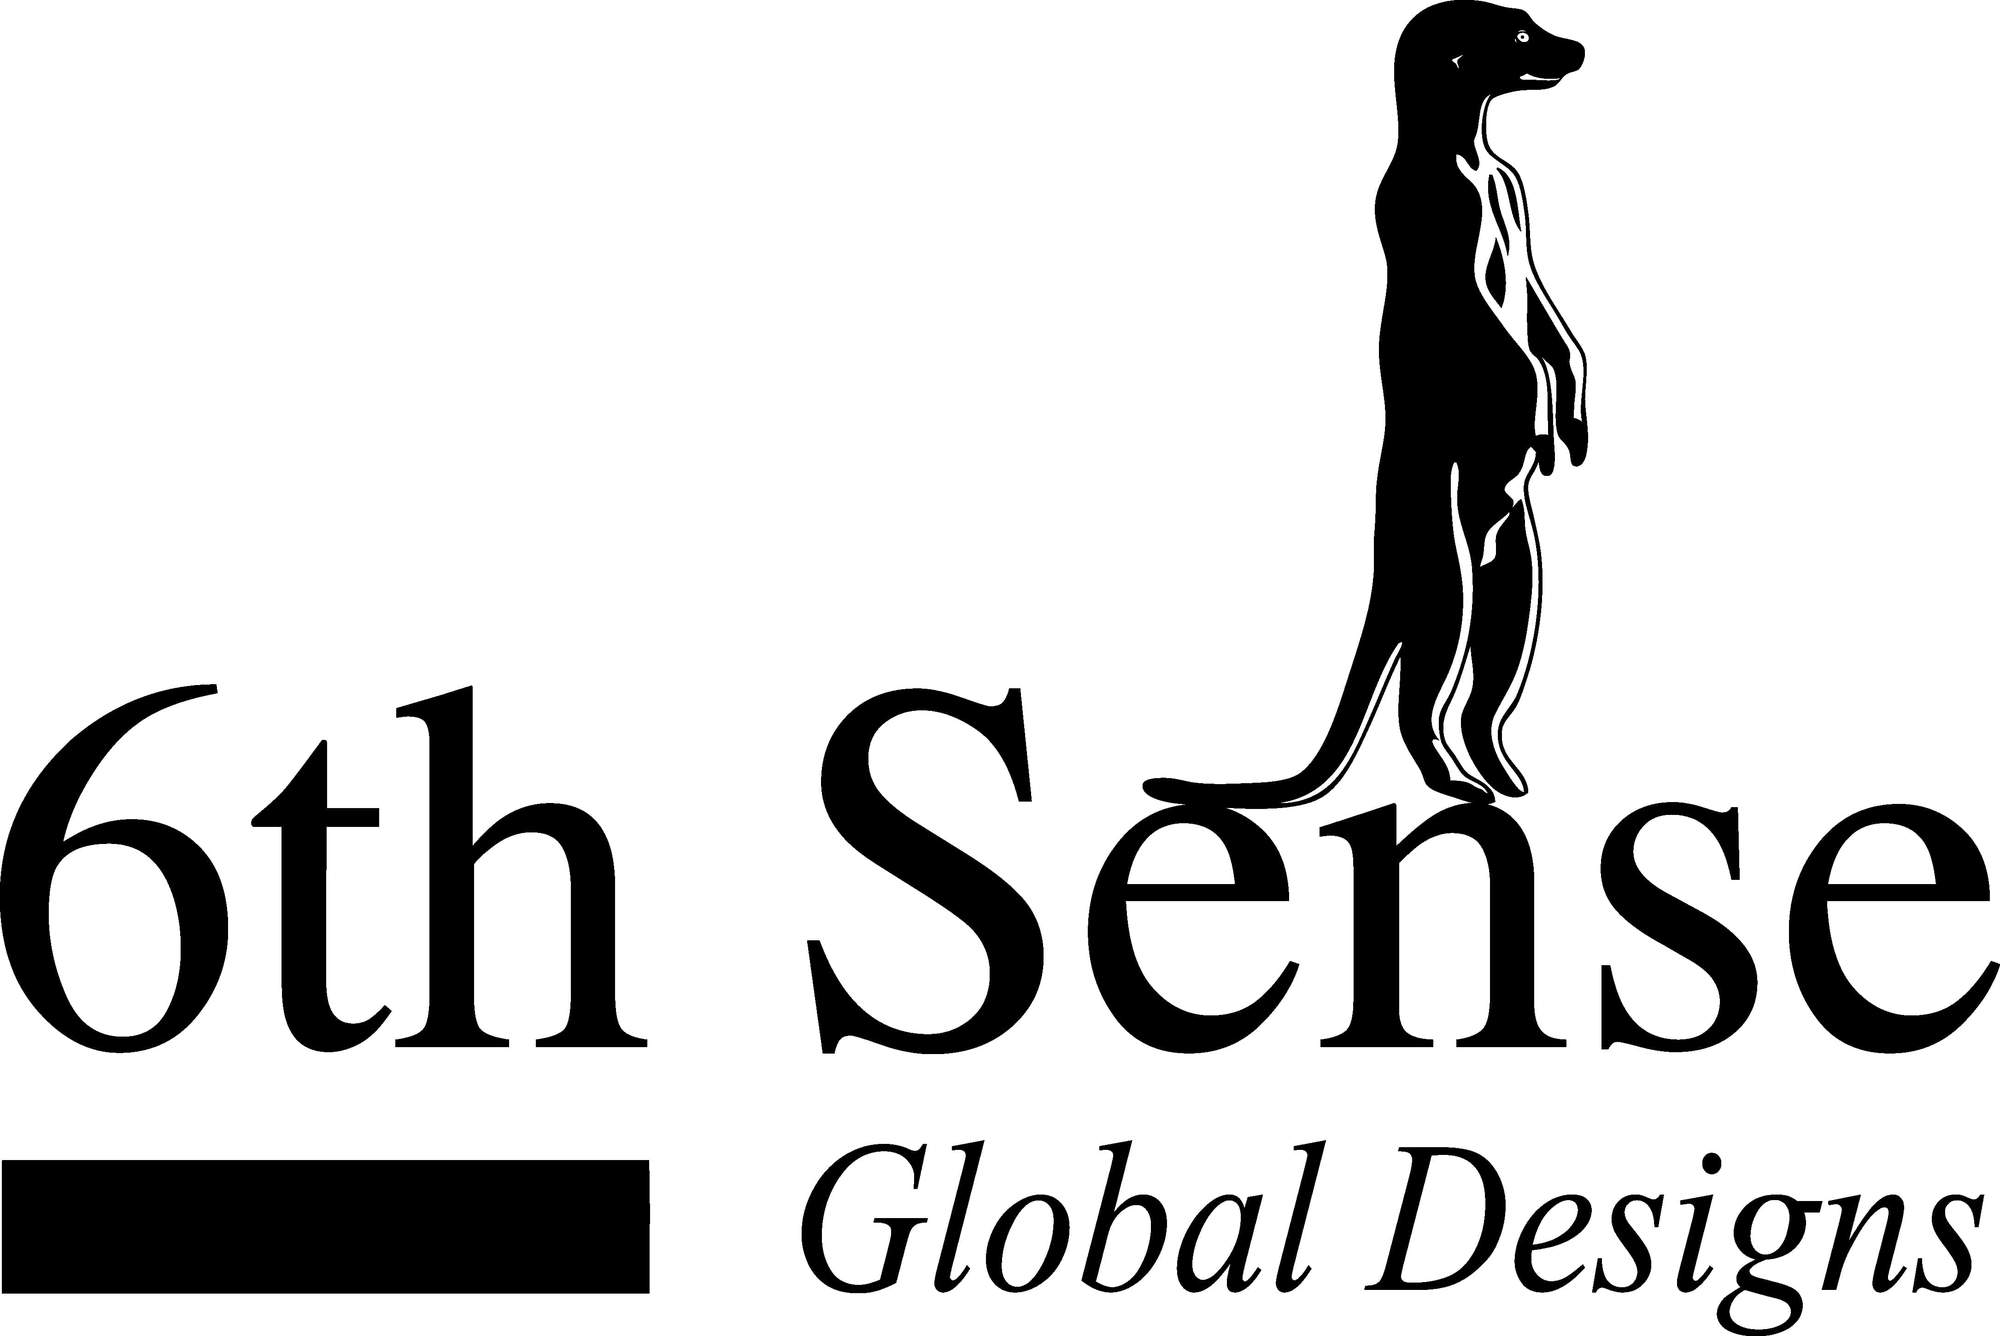 6th Sense Global Designs
“I was mega impressed with the professionalism of Stocktaking.ie. I was encouraged to complete several pf my own audit rechecks which gave me full confidence in the accuracy of the count. Very happy, Stocktaking.ie not only look good in their uniforms, they are streets ahead of any Stocktaking company I have used before”